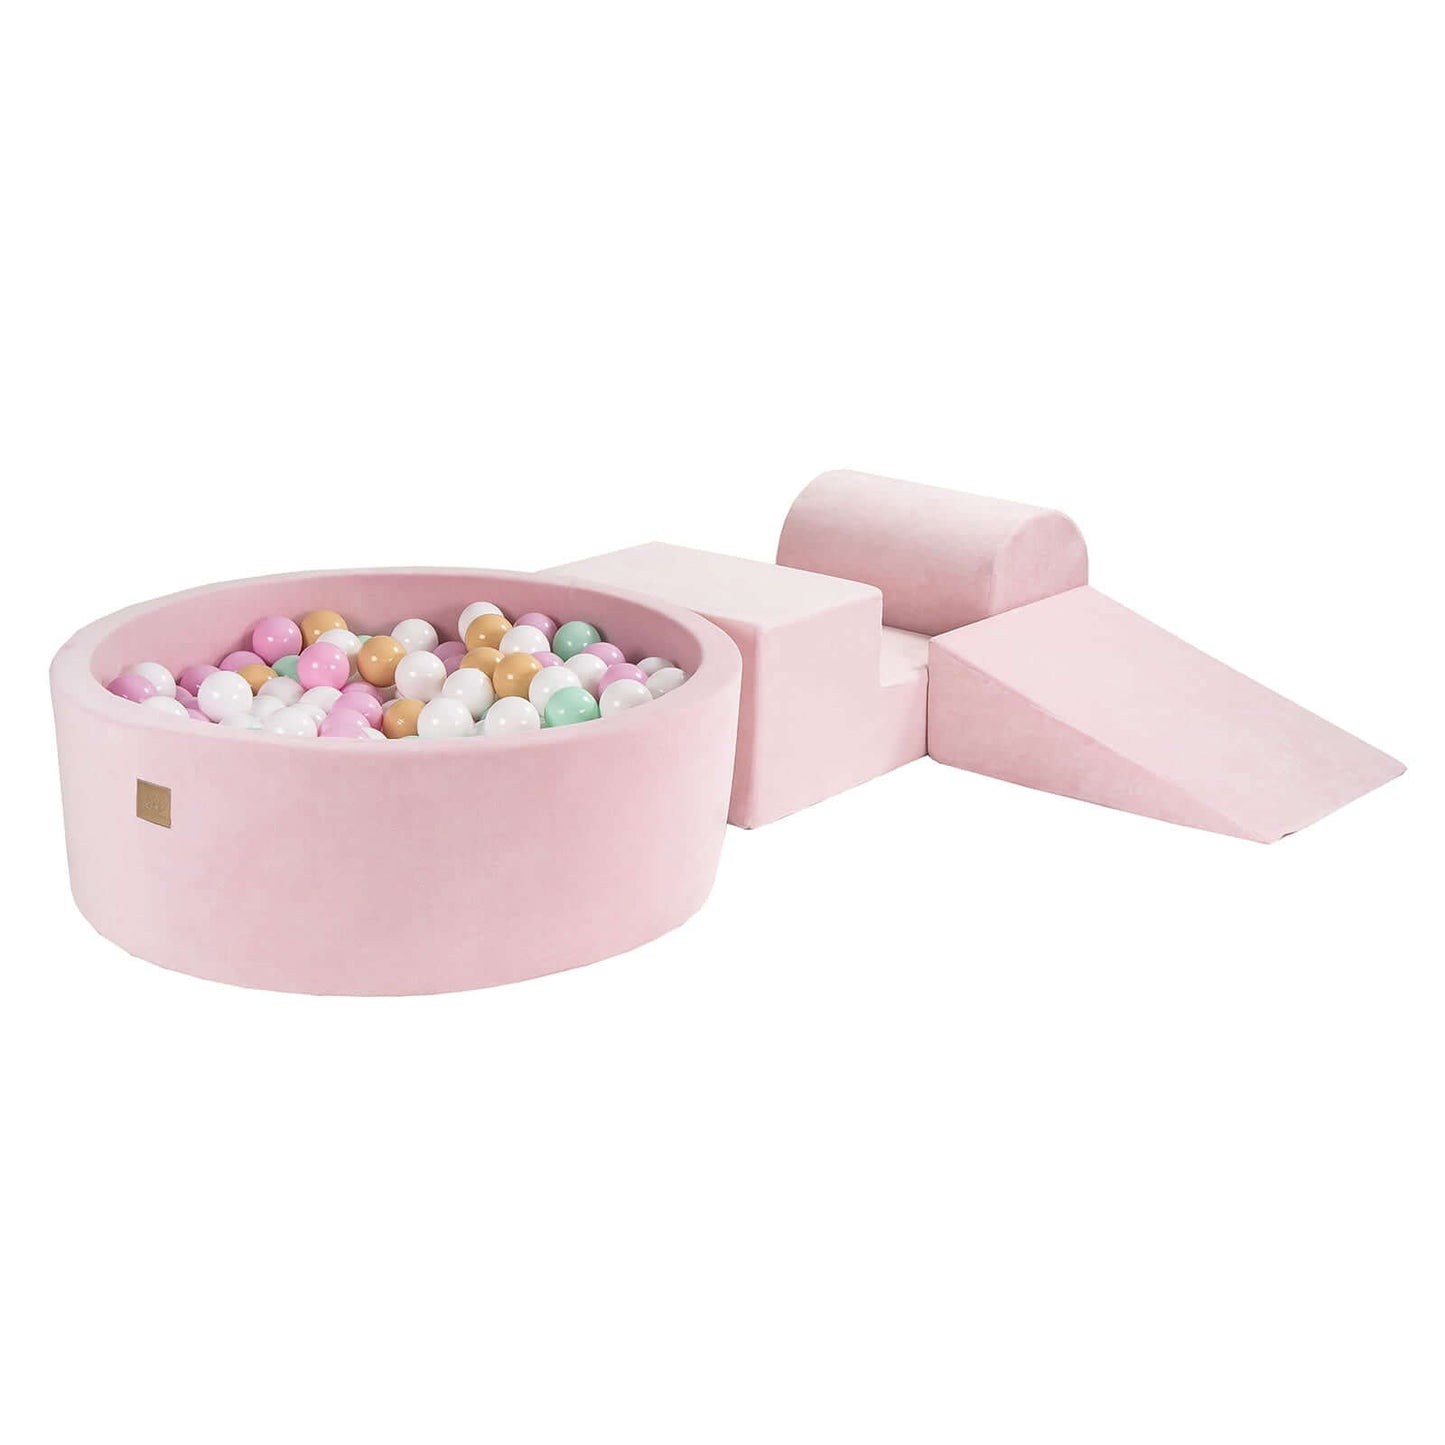 MeowBaby® Foam Play Set with Ball Pit + 200 Balls, Light Pink